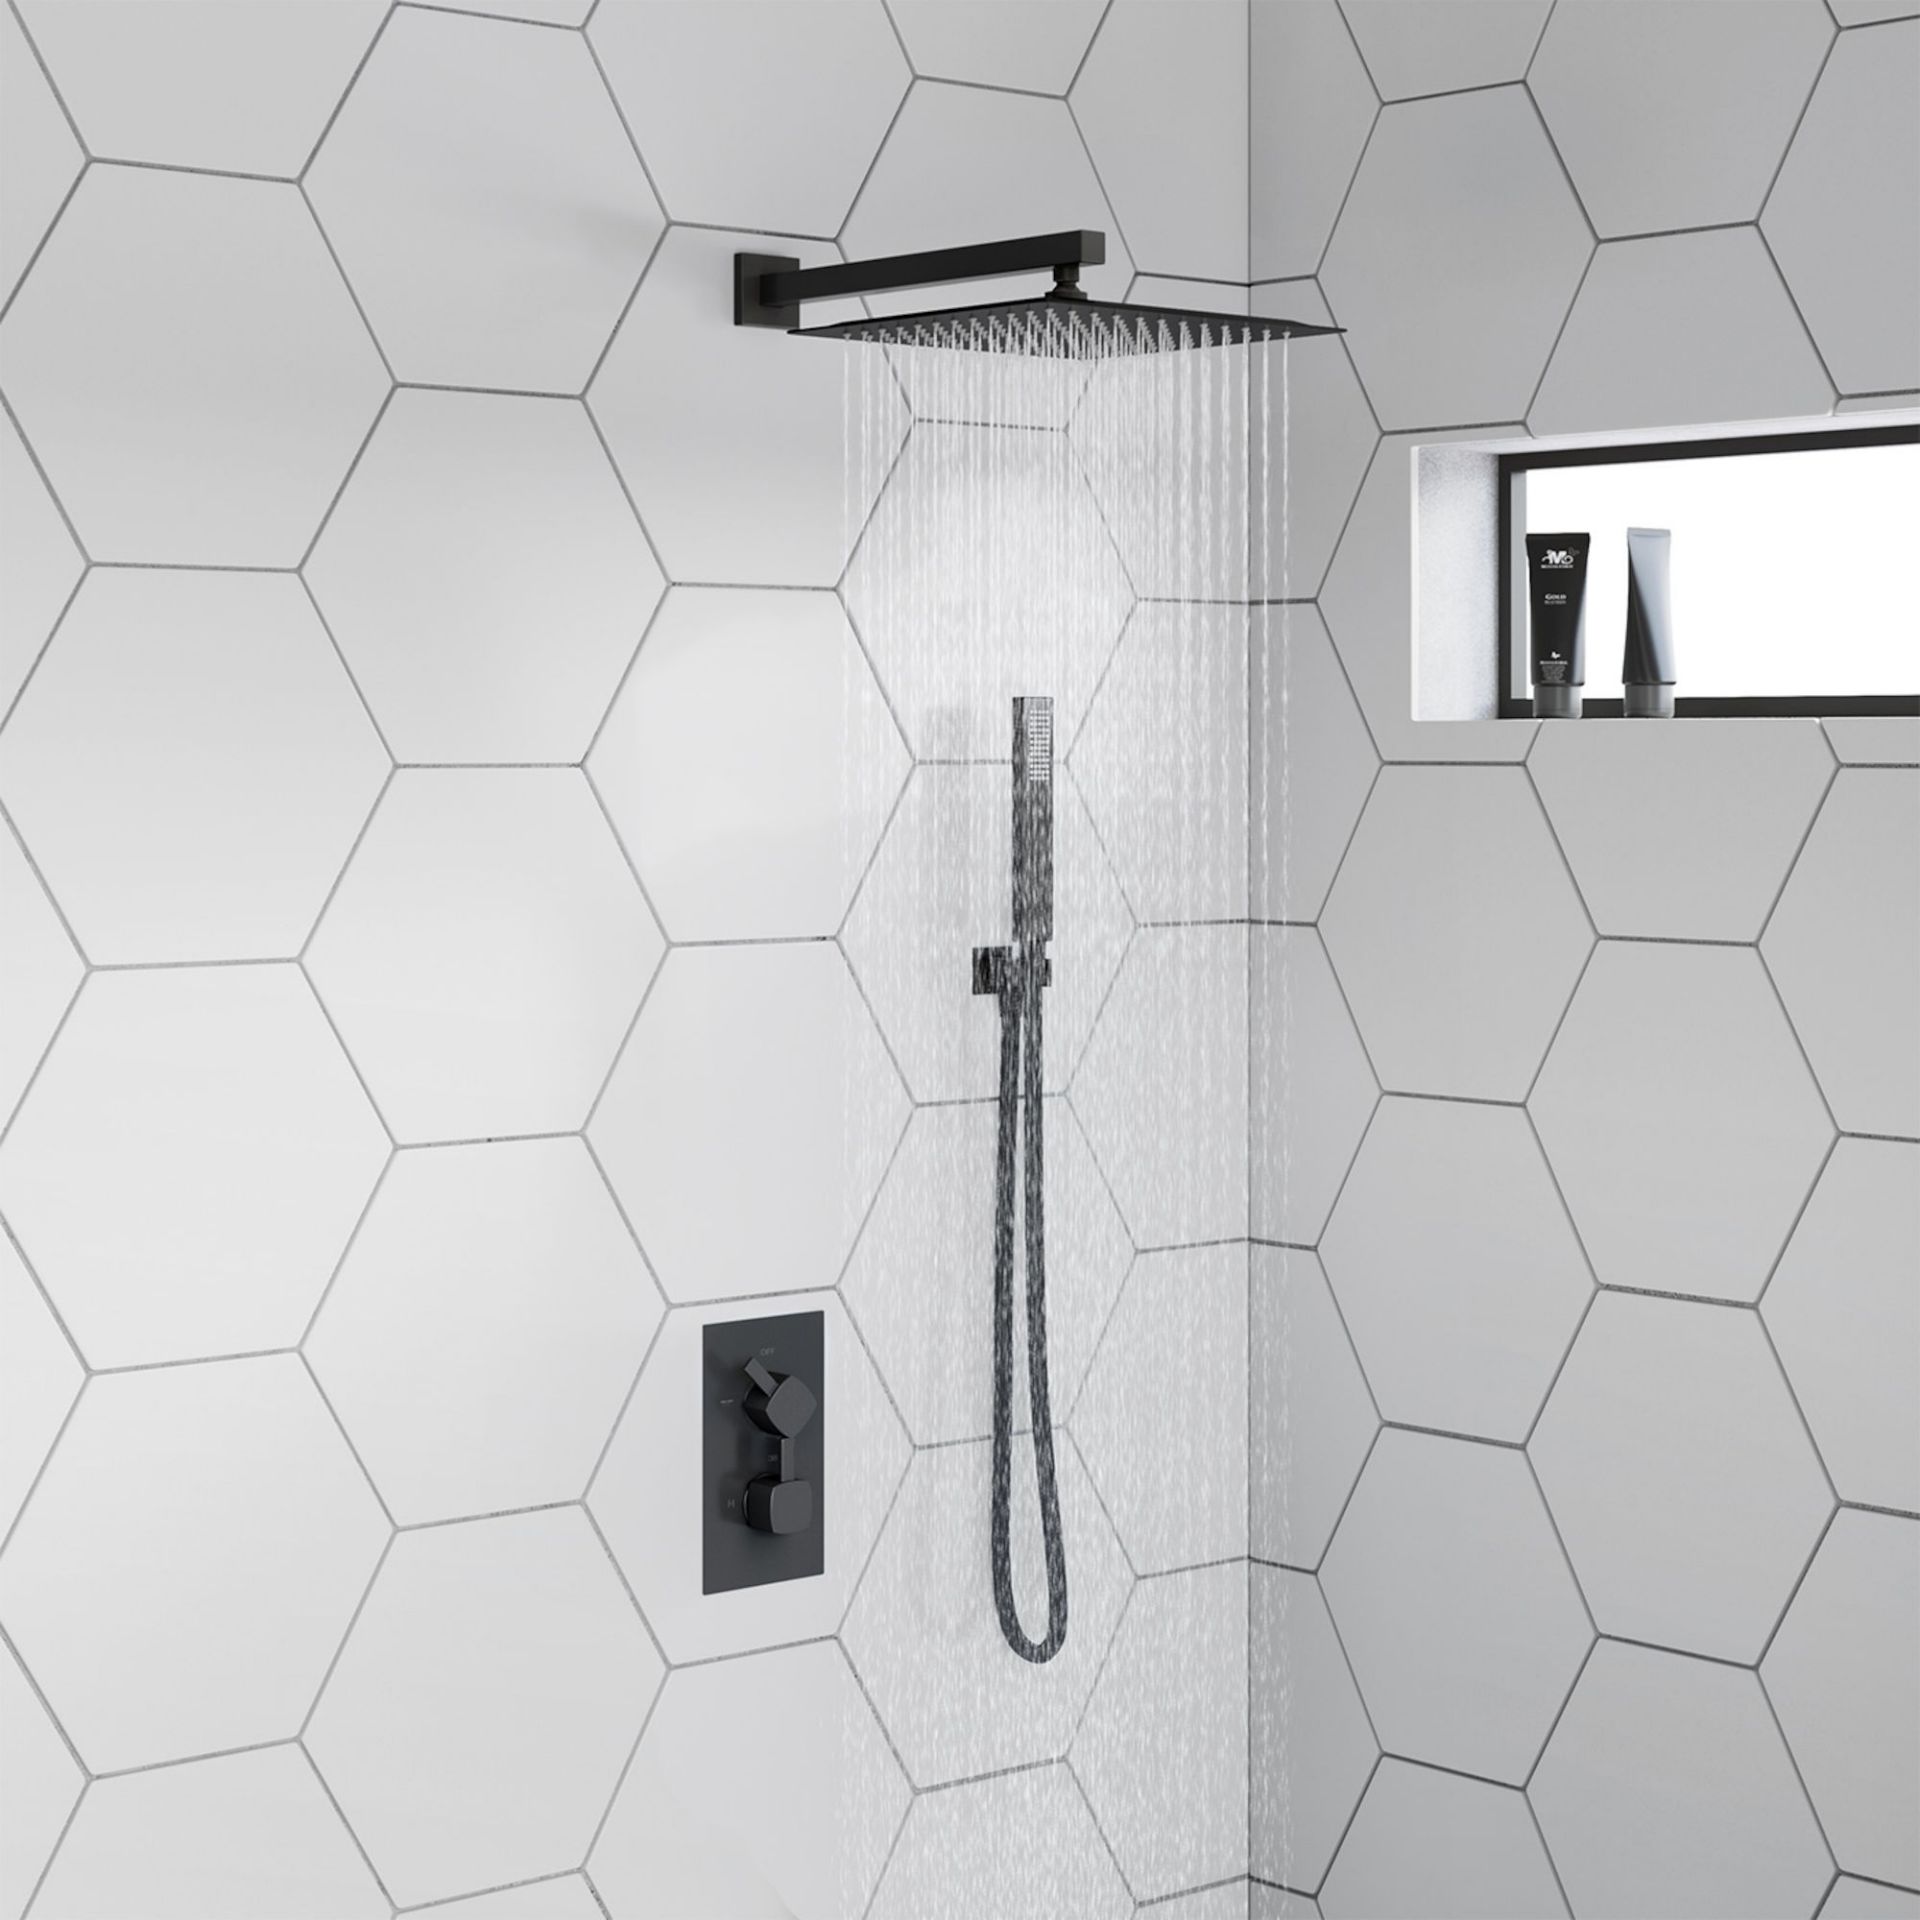 (YC67) Matte Black Square Concealed Thermostatic Mixer Shower Kit & Large Head. RRP £419.99.